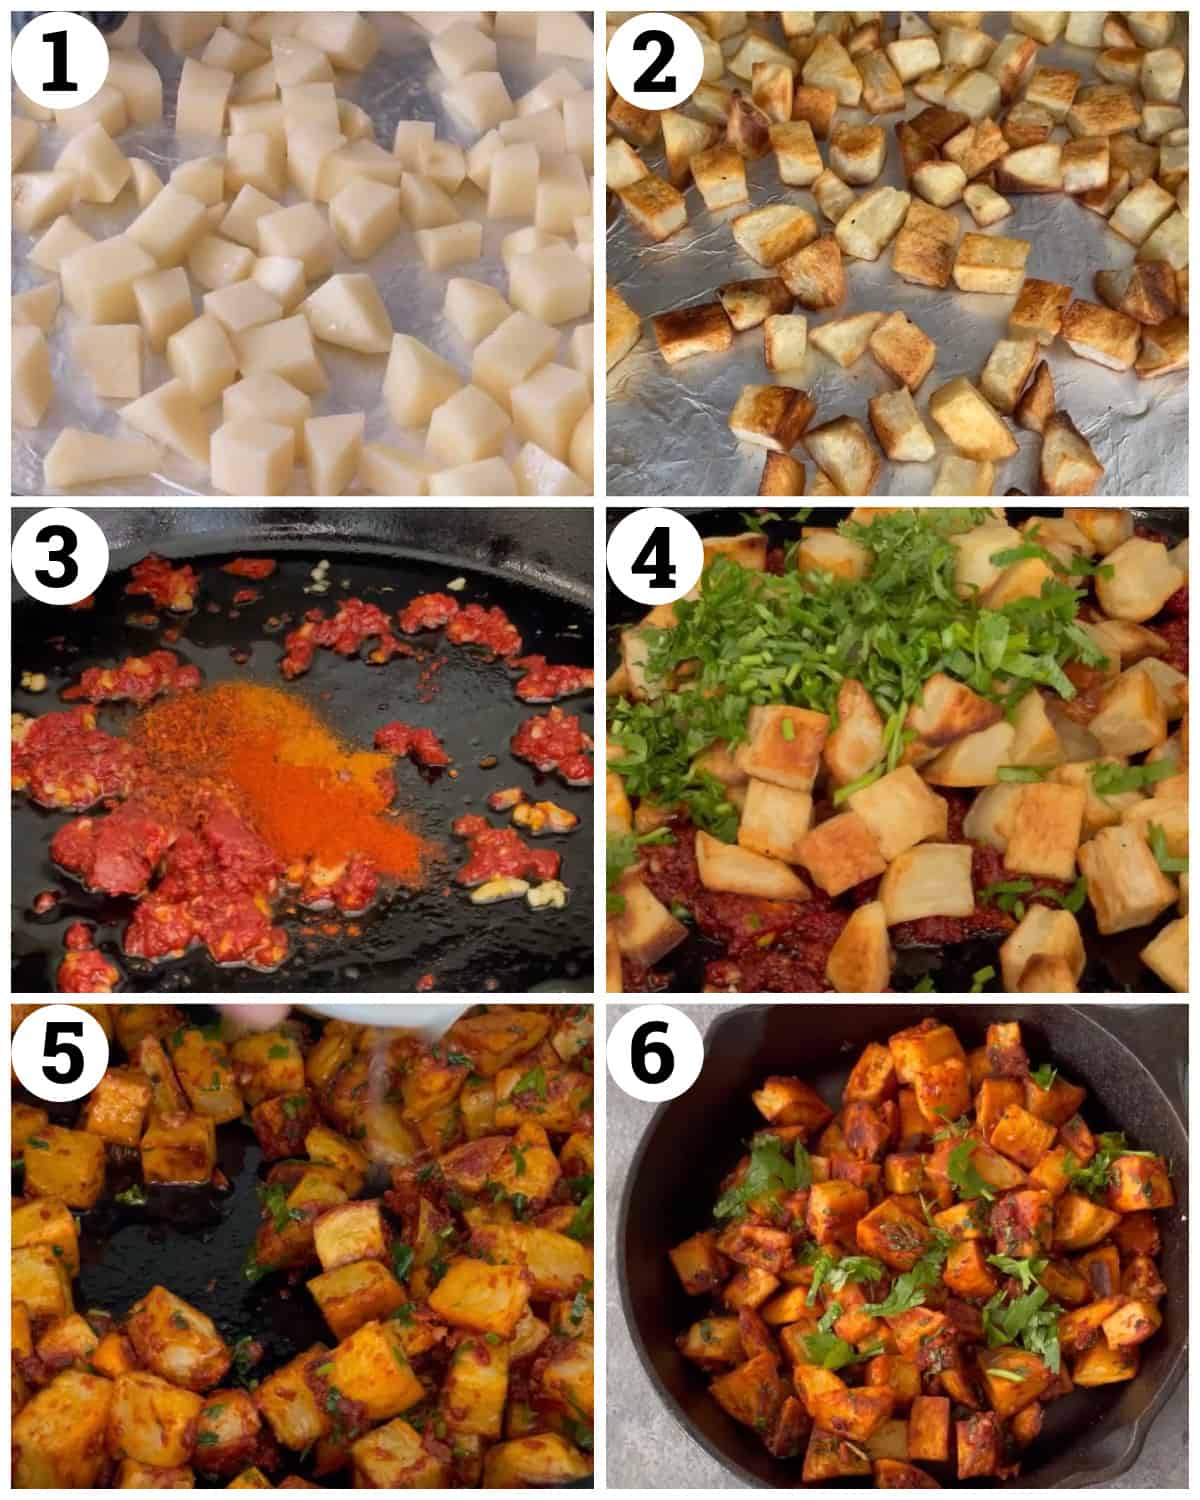 roast the potatoes, make the spicy sauce and toss. Finish with lemon juice. 